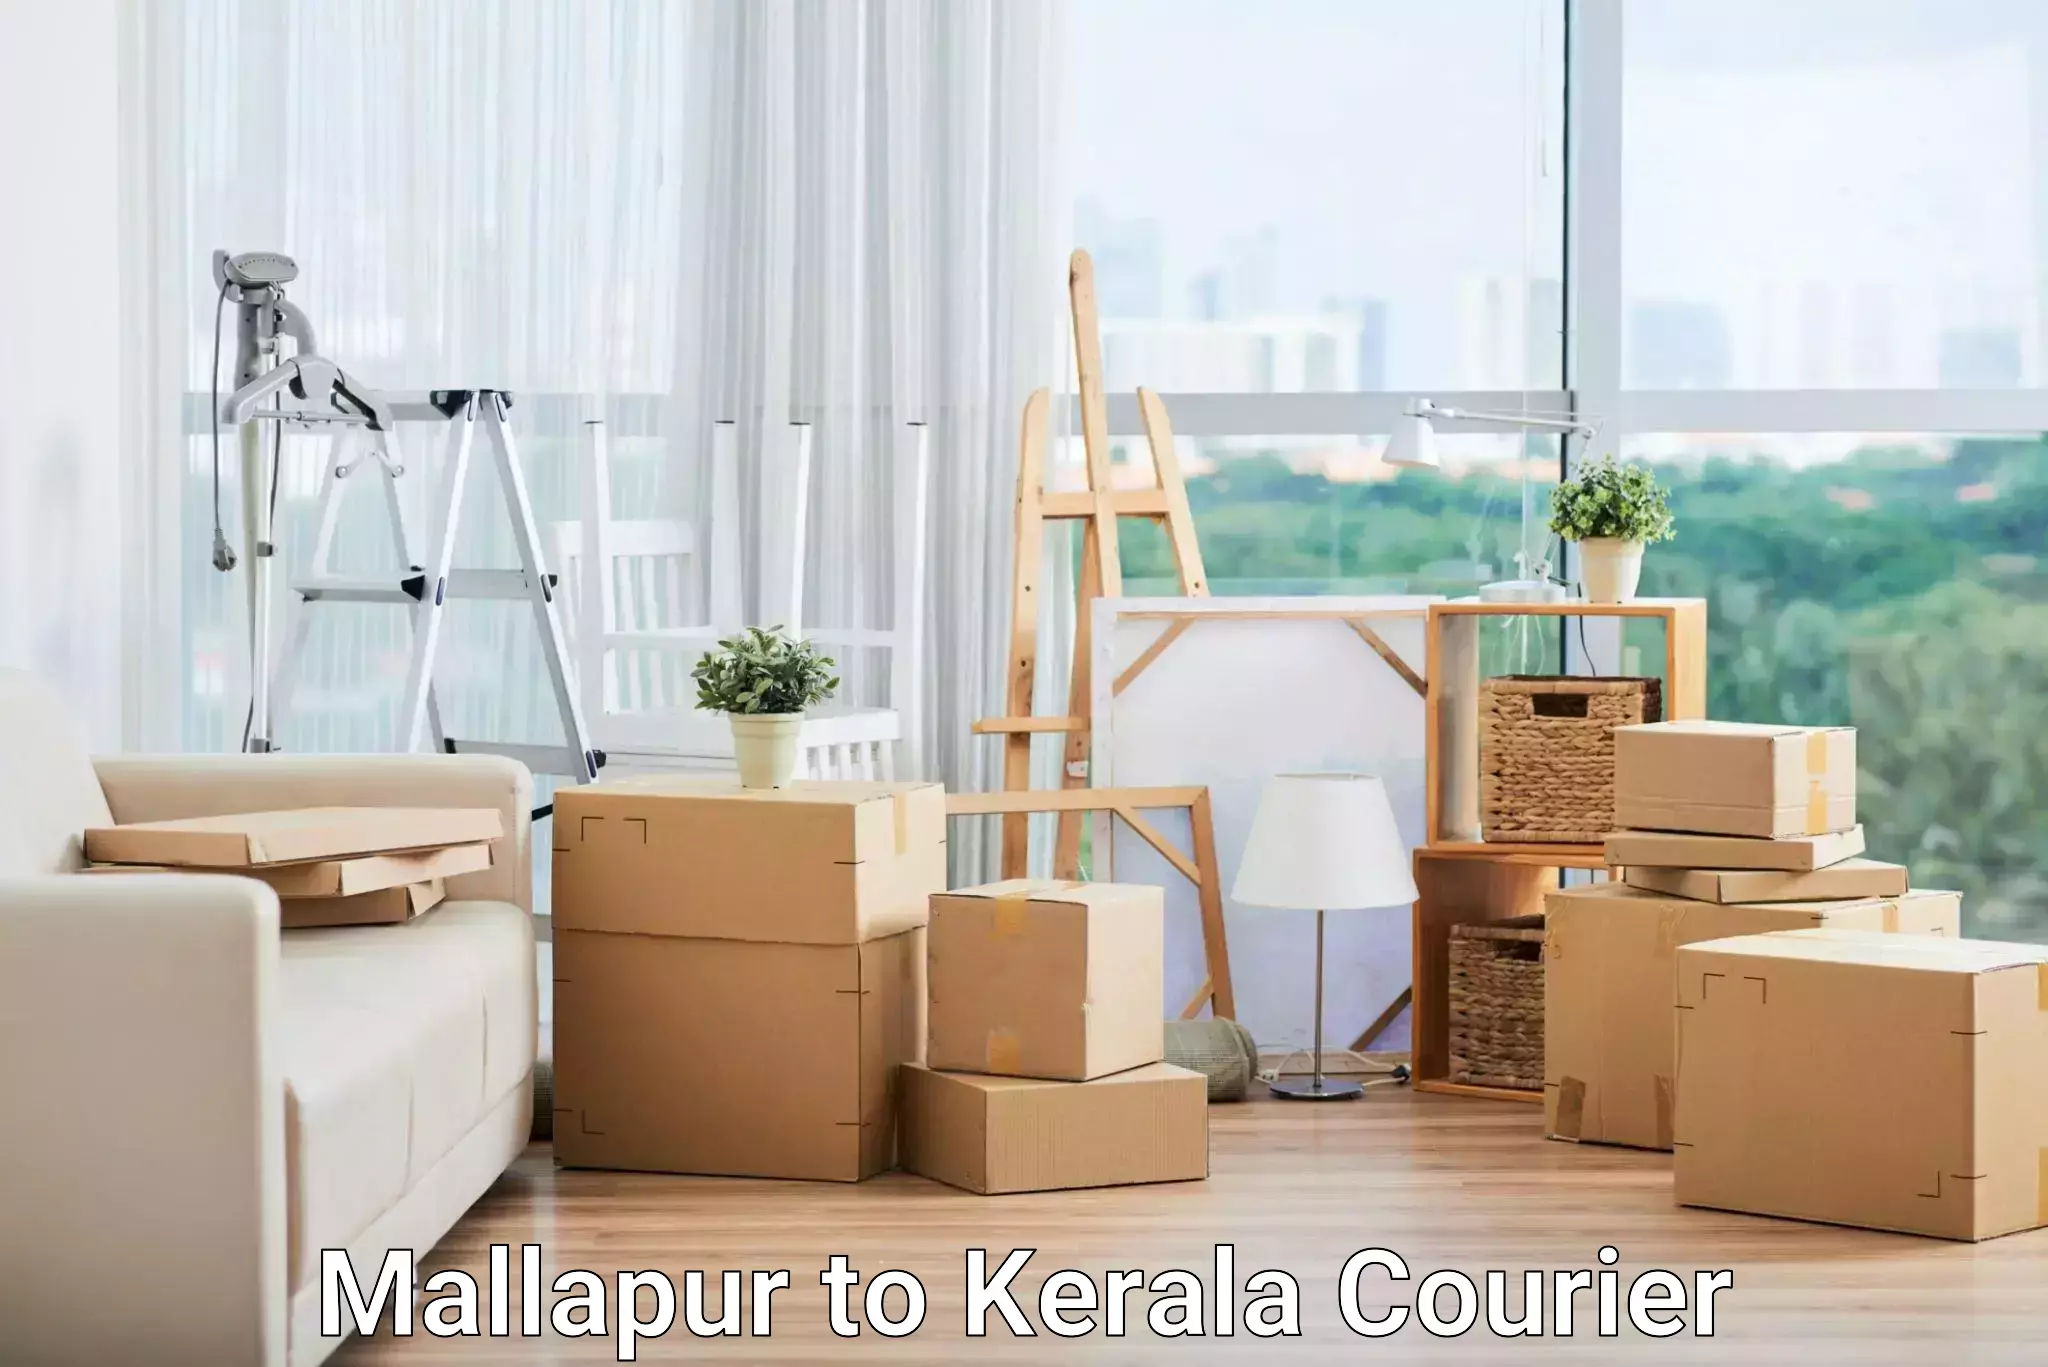 Package delivery network Mallapur to Kerala